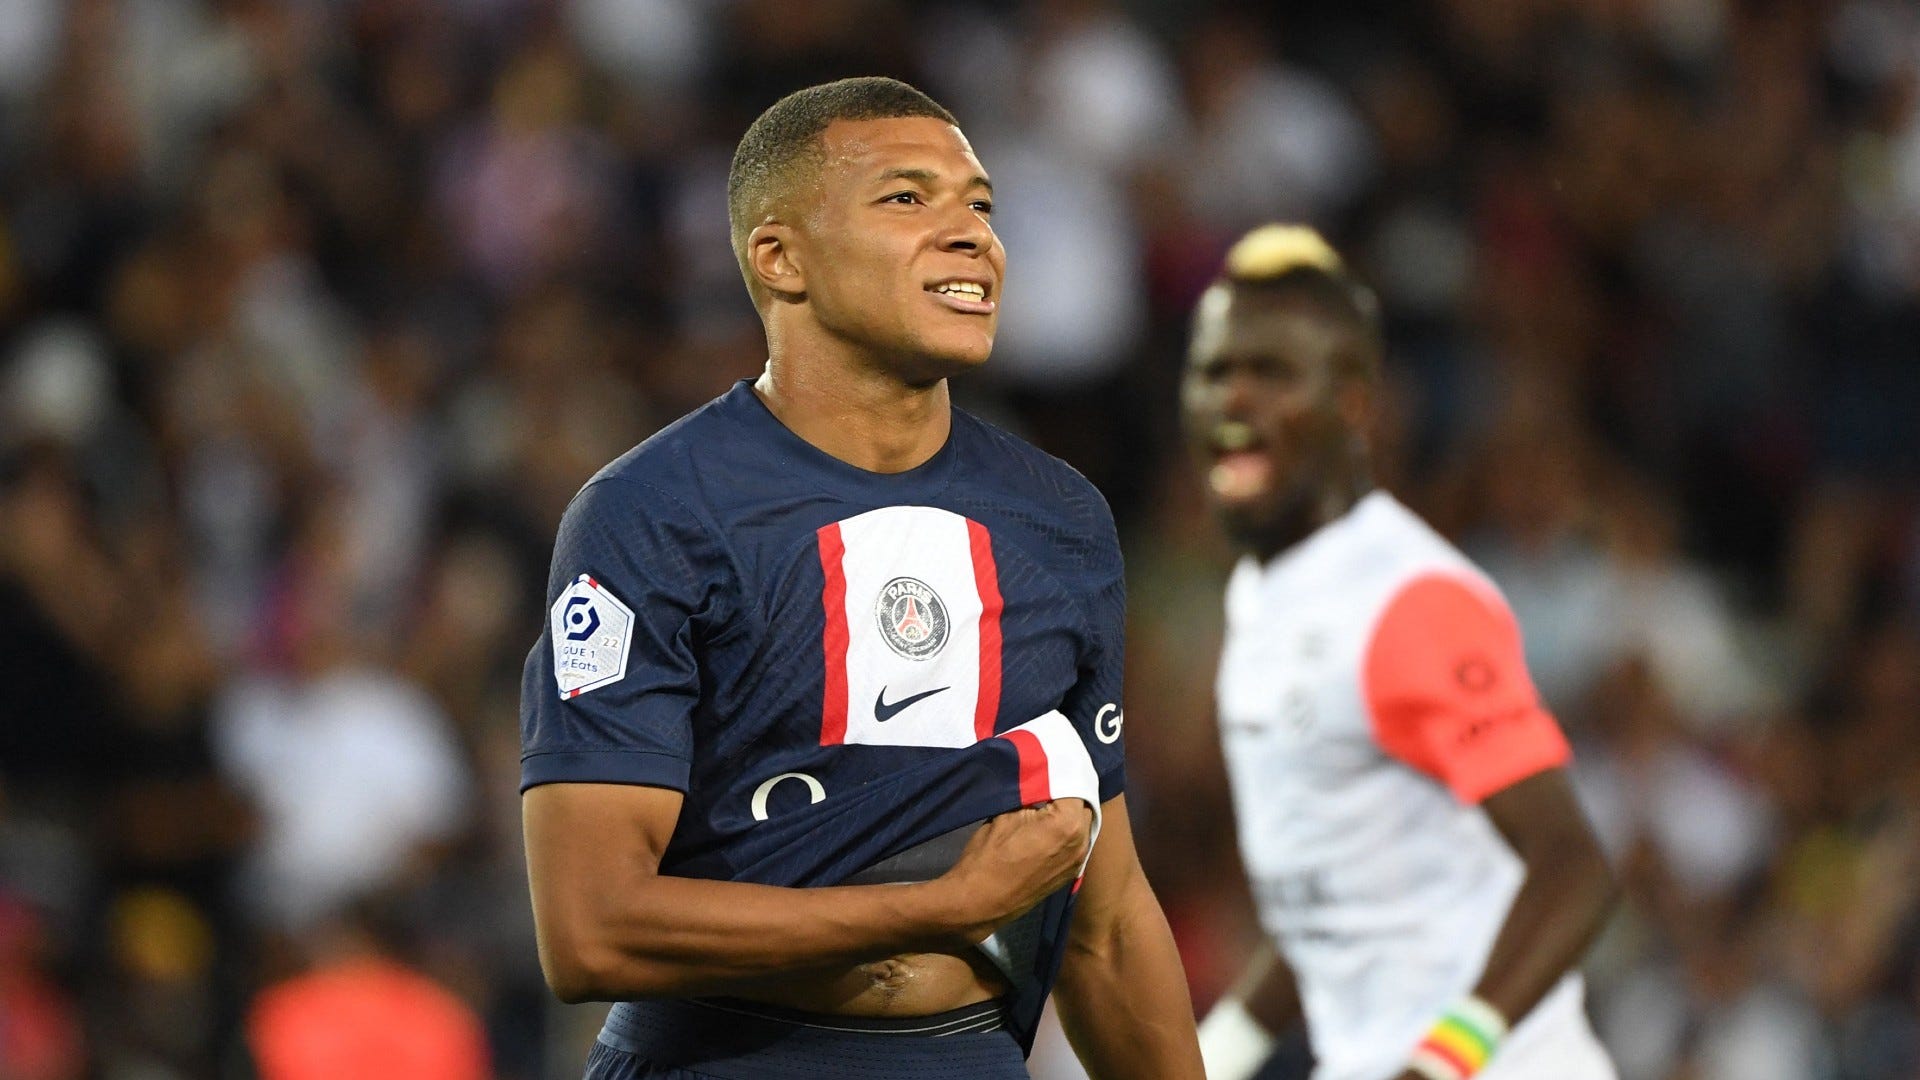 'Mbappe has nothing to prove to anyone' - PSG star defended by Henry after on-pitch sulk vs Montpellier | Goal.com India